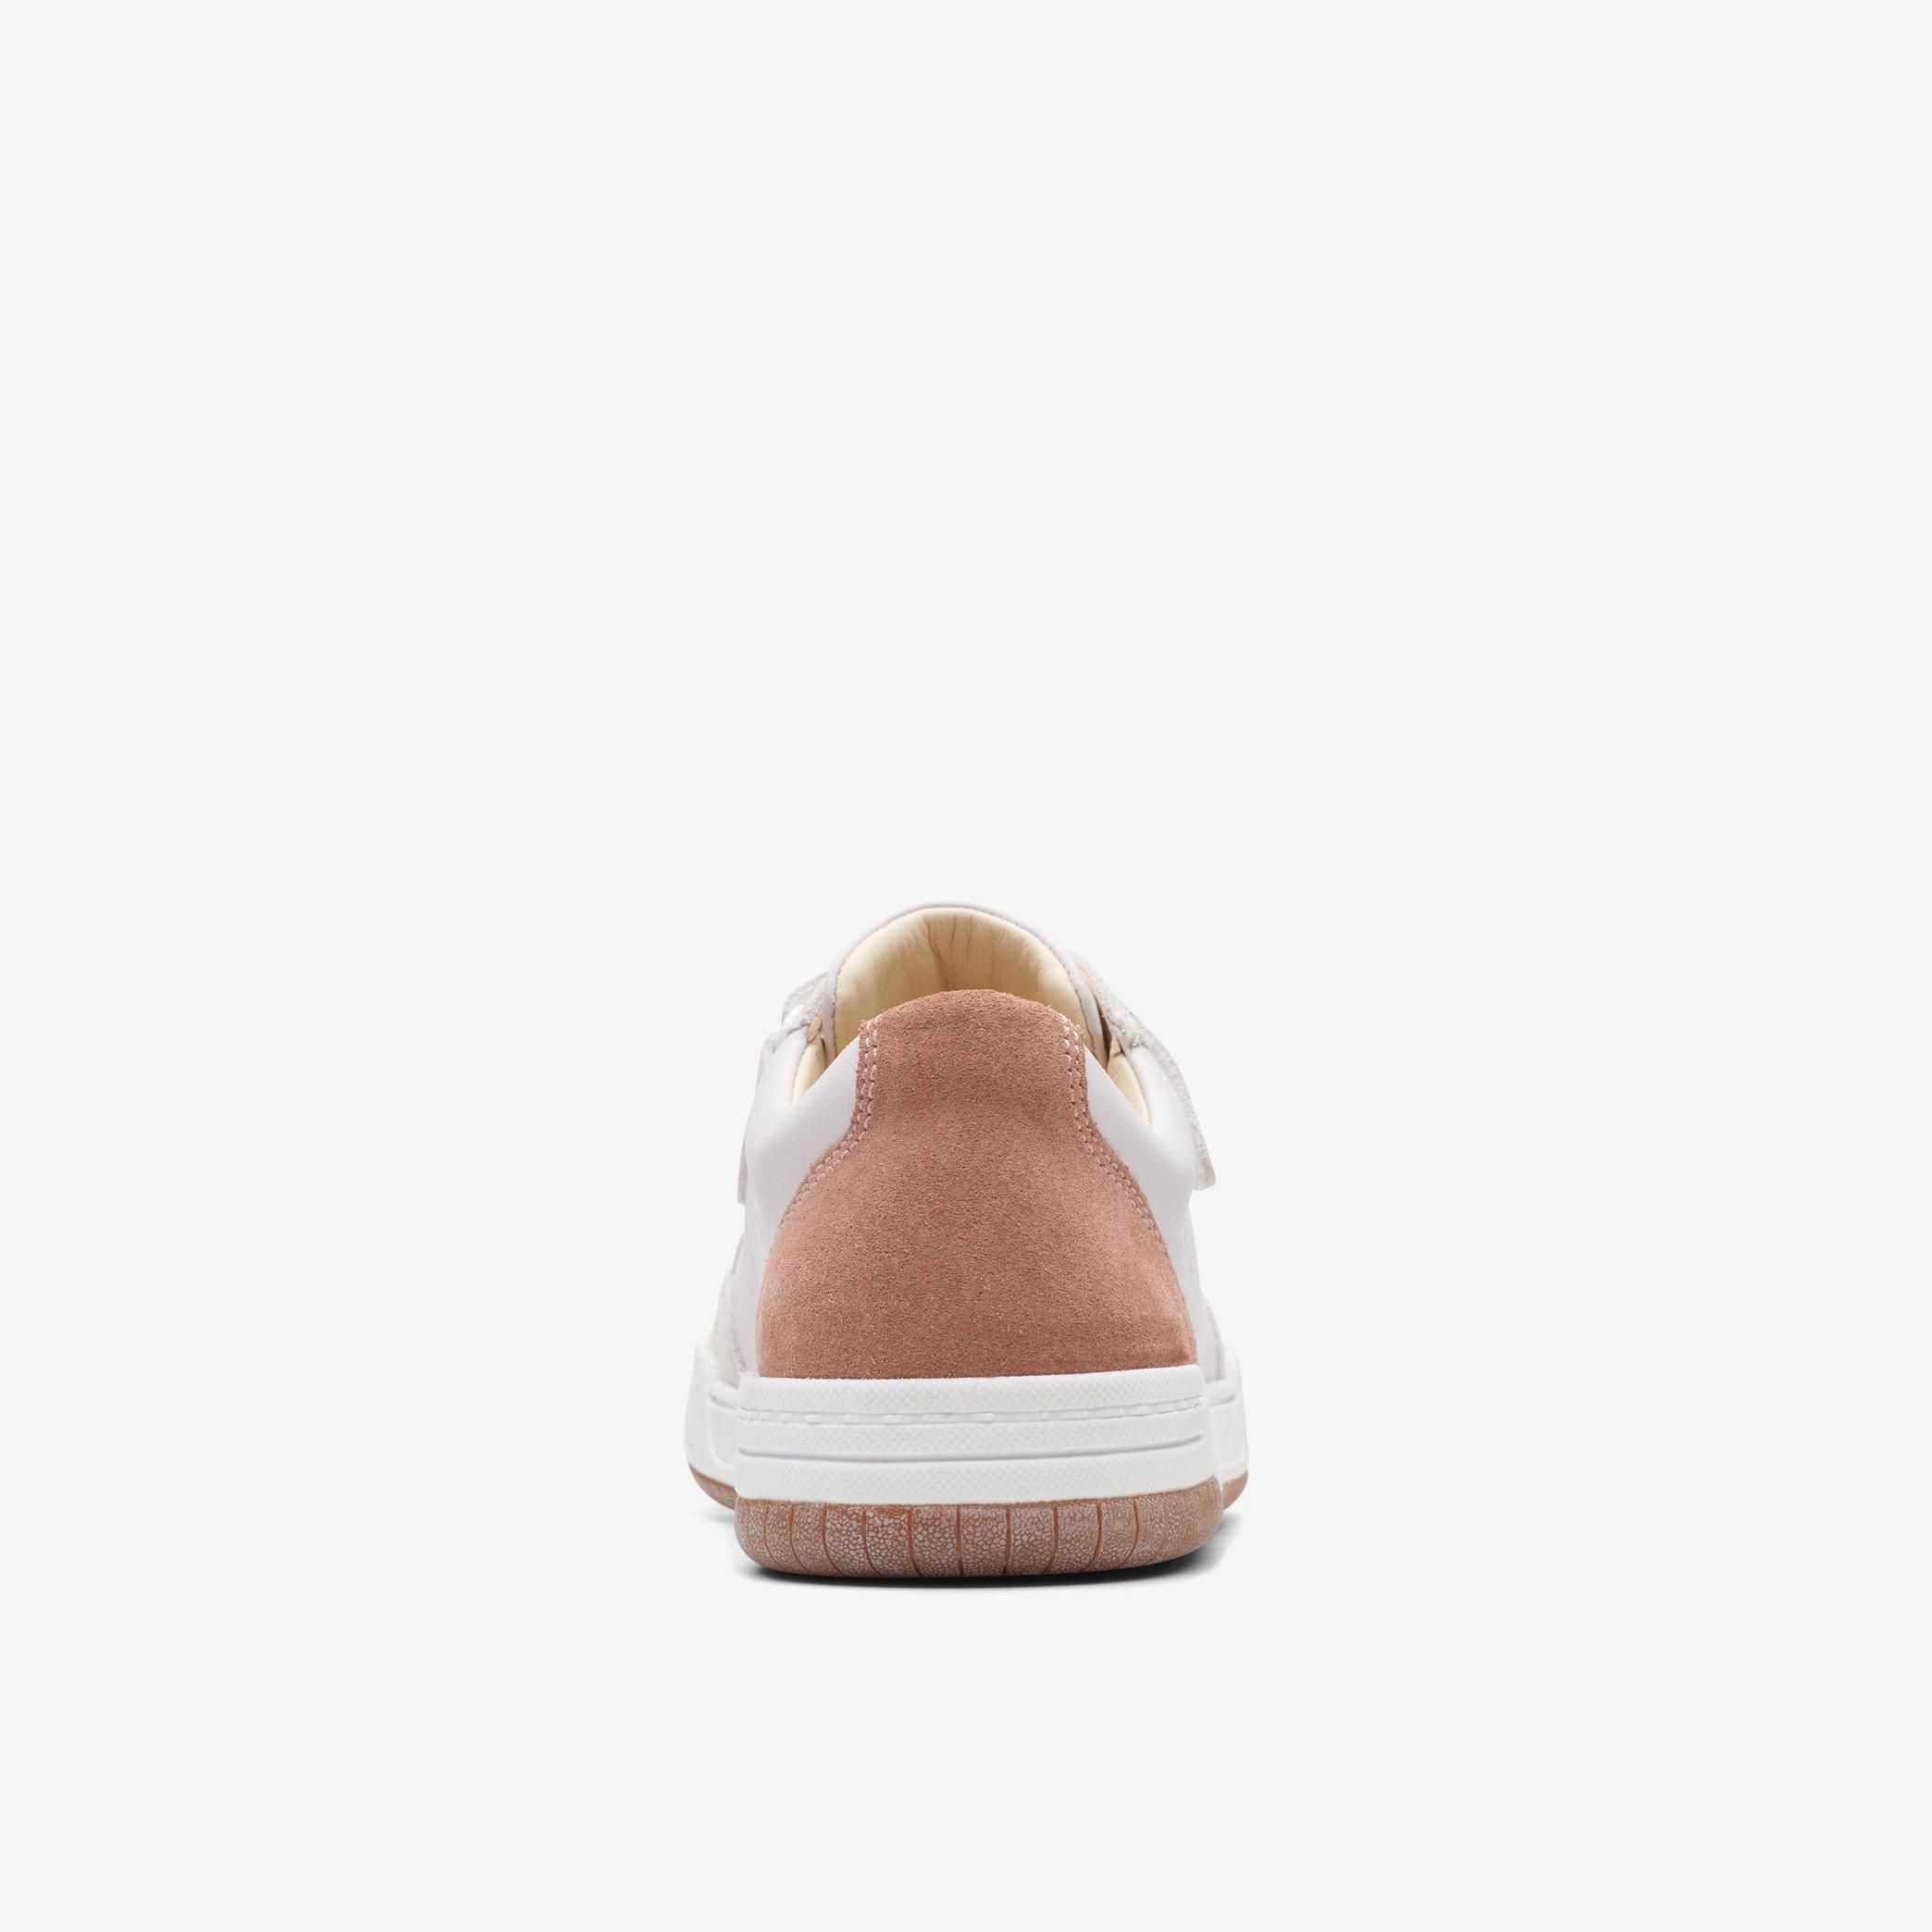 Fawn Hero Youth White/Pink Shoes, view 5 of 6